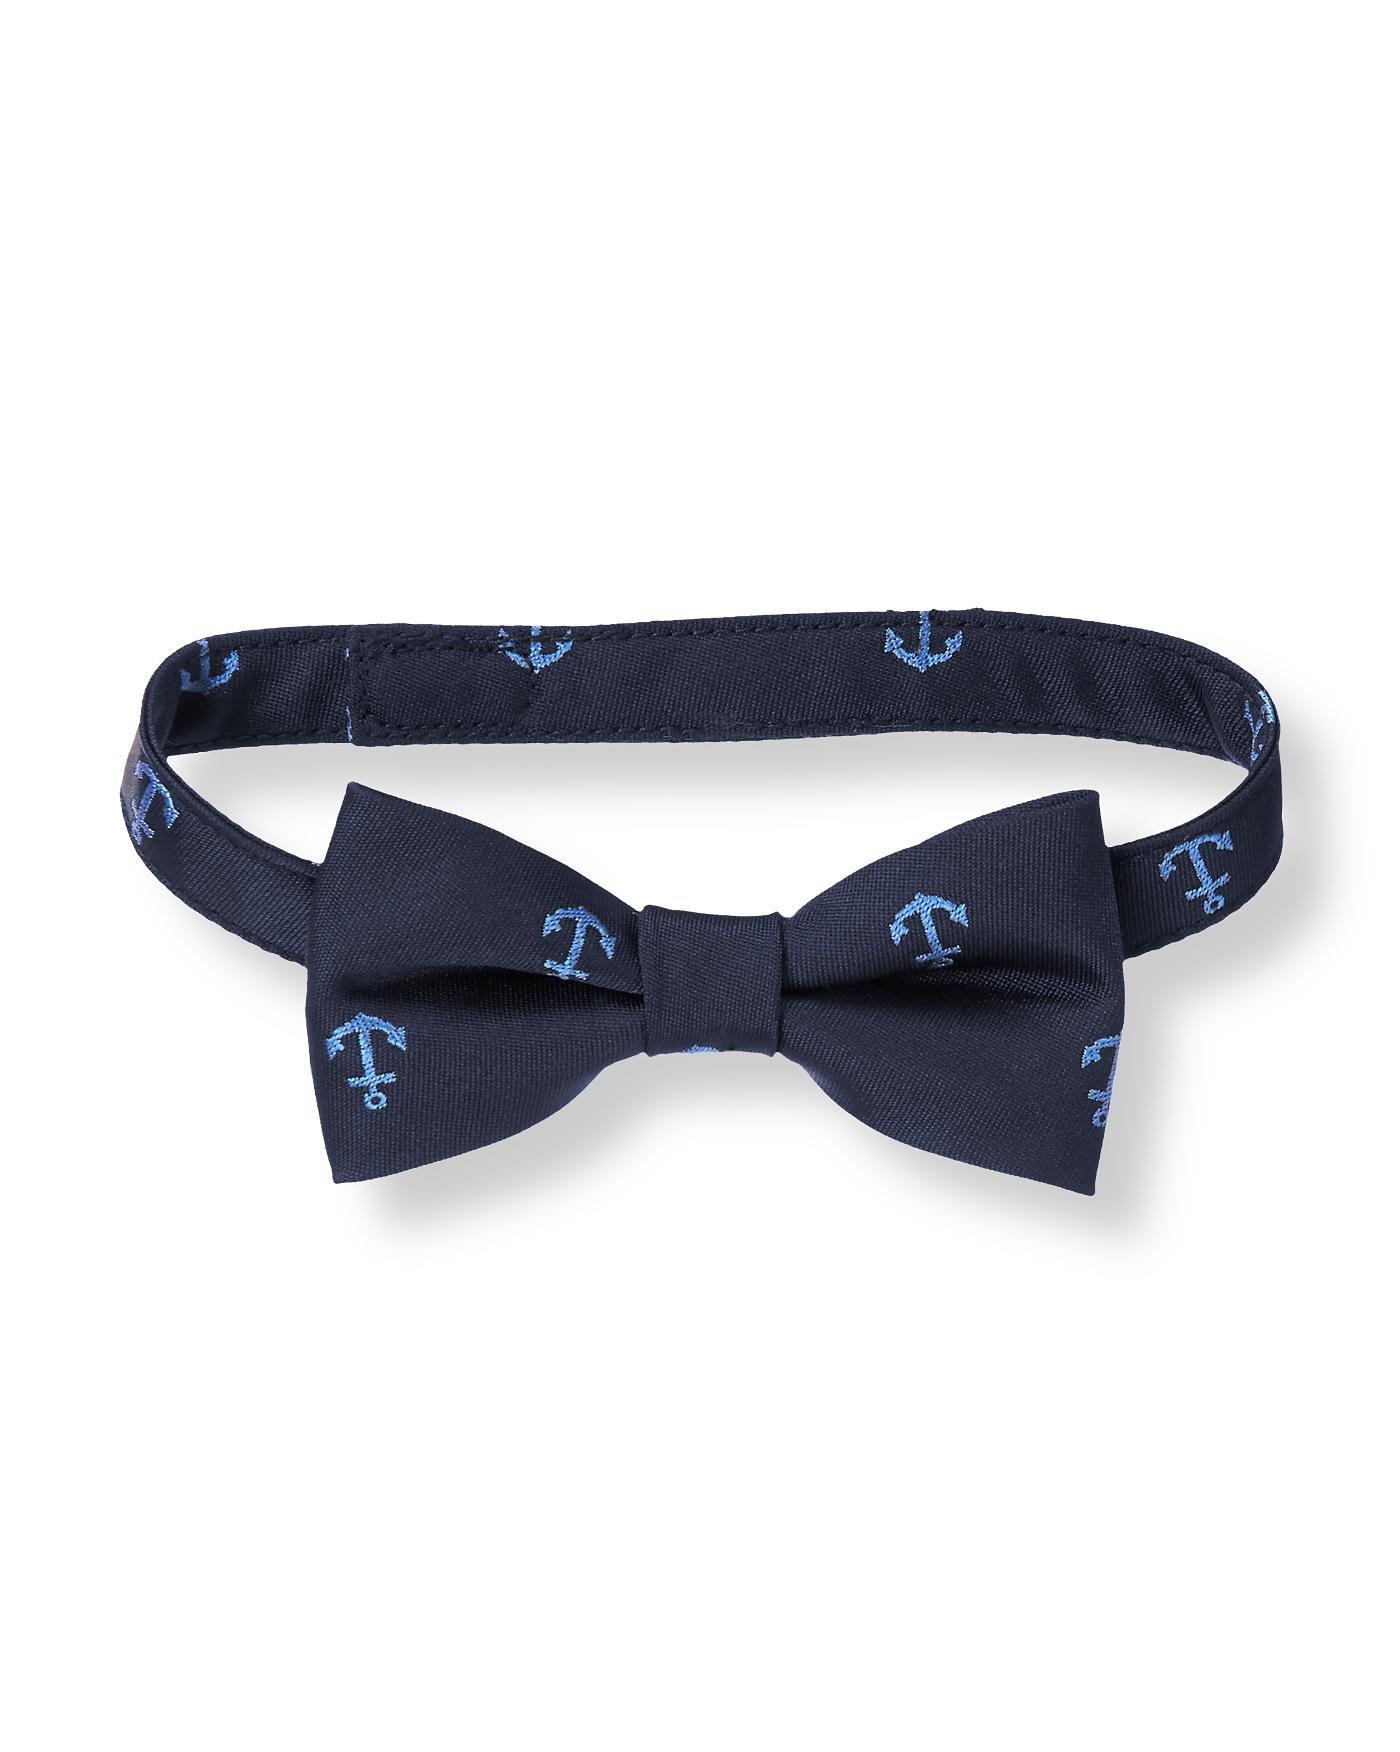 Embroidered Anchor Bowtie image number 0